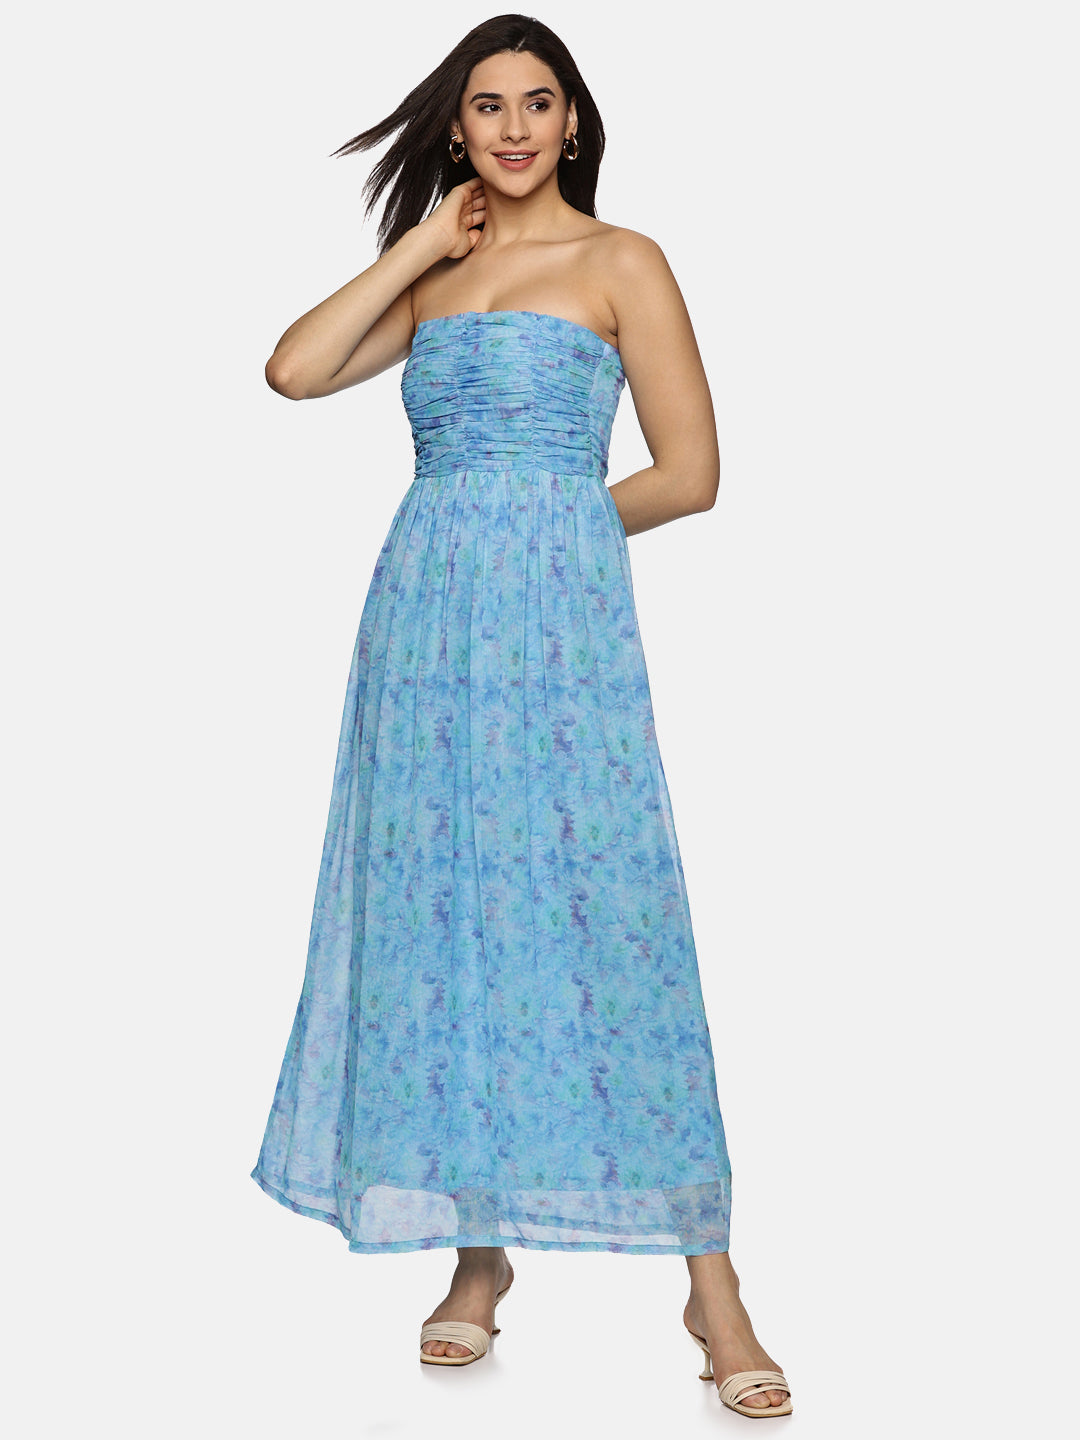 IS.U Floral Blue Front Gathered Maxi Dress